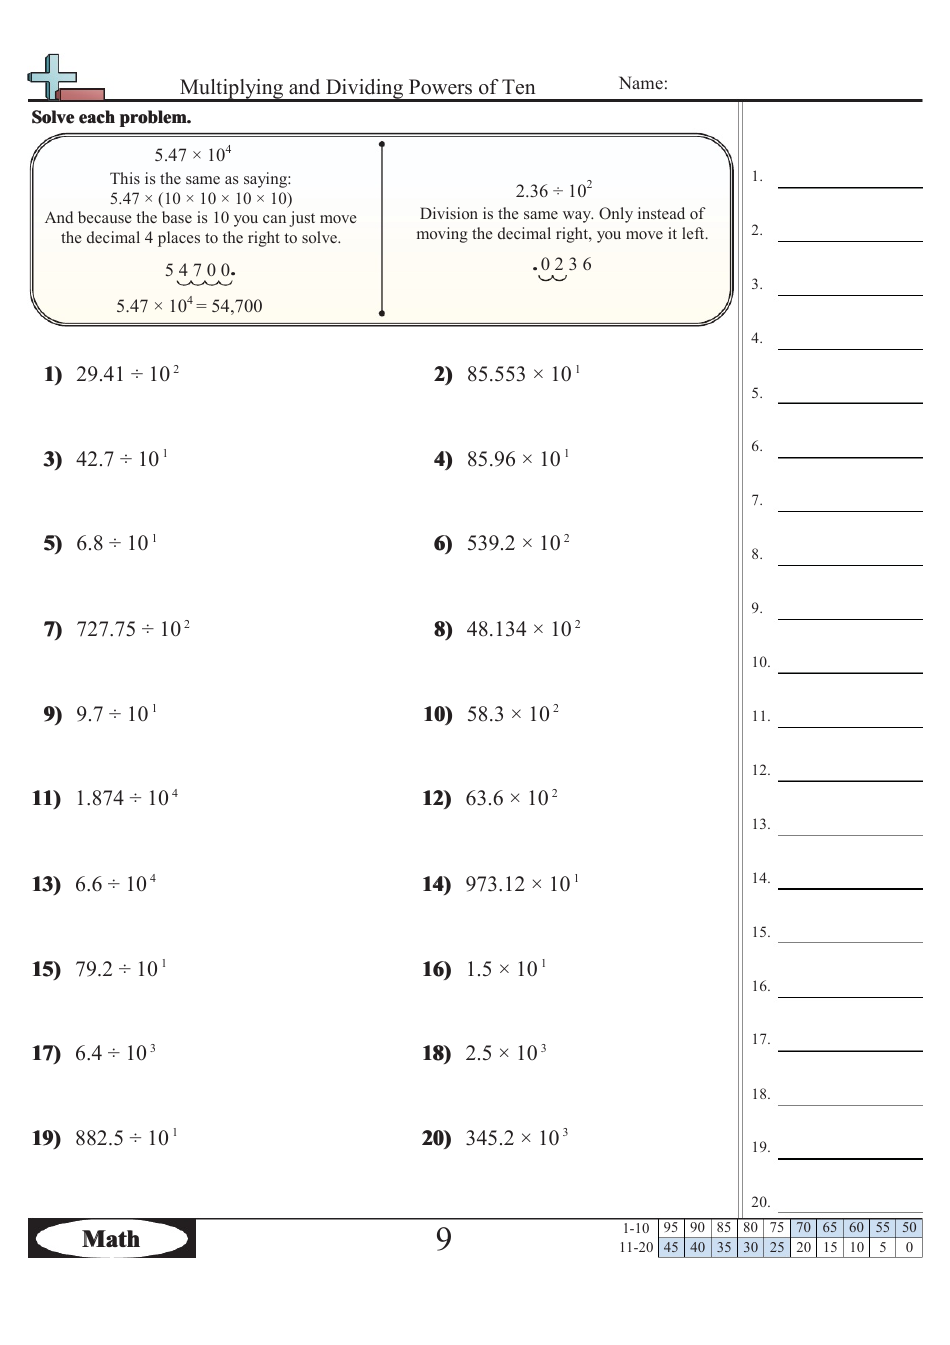 Multiplying and Dividing Powers of Ten Worksheet With Answer Key visual preview